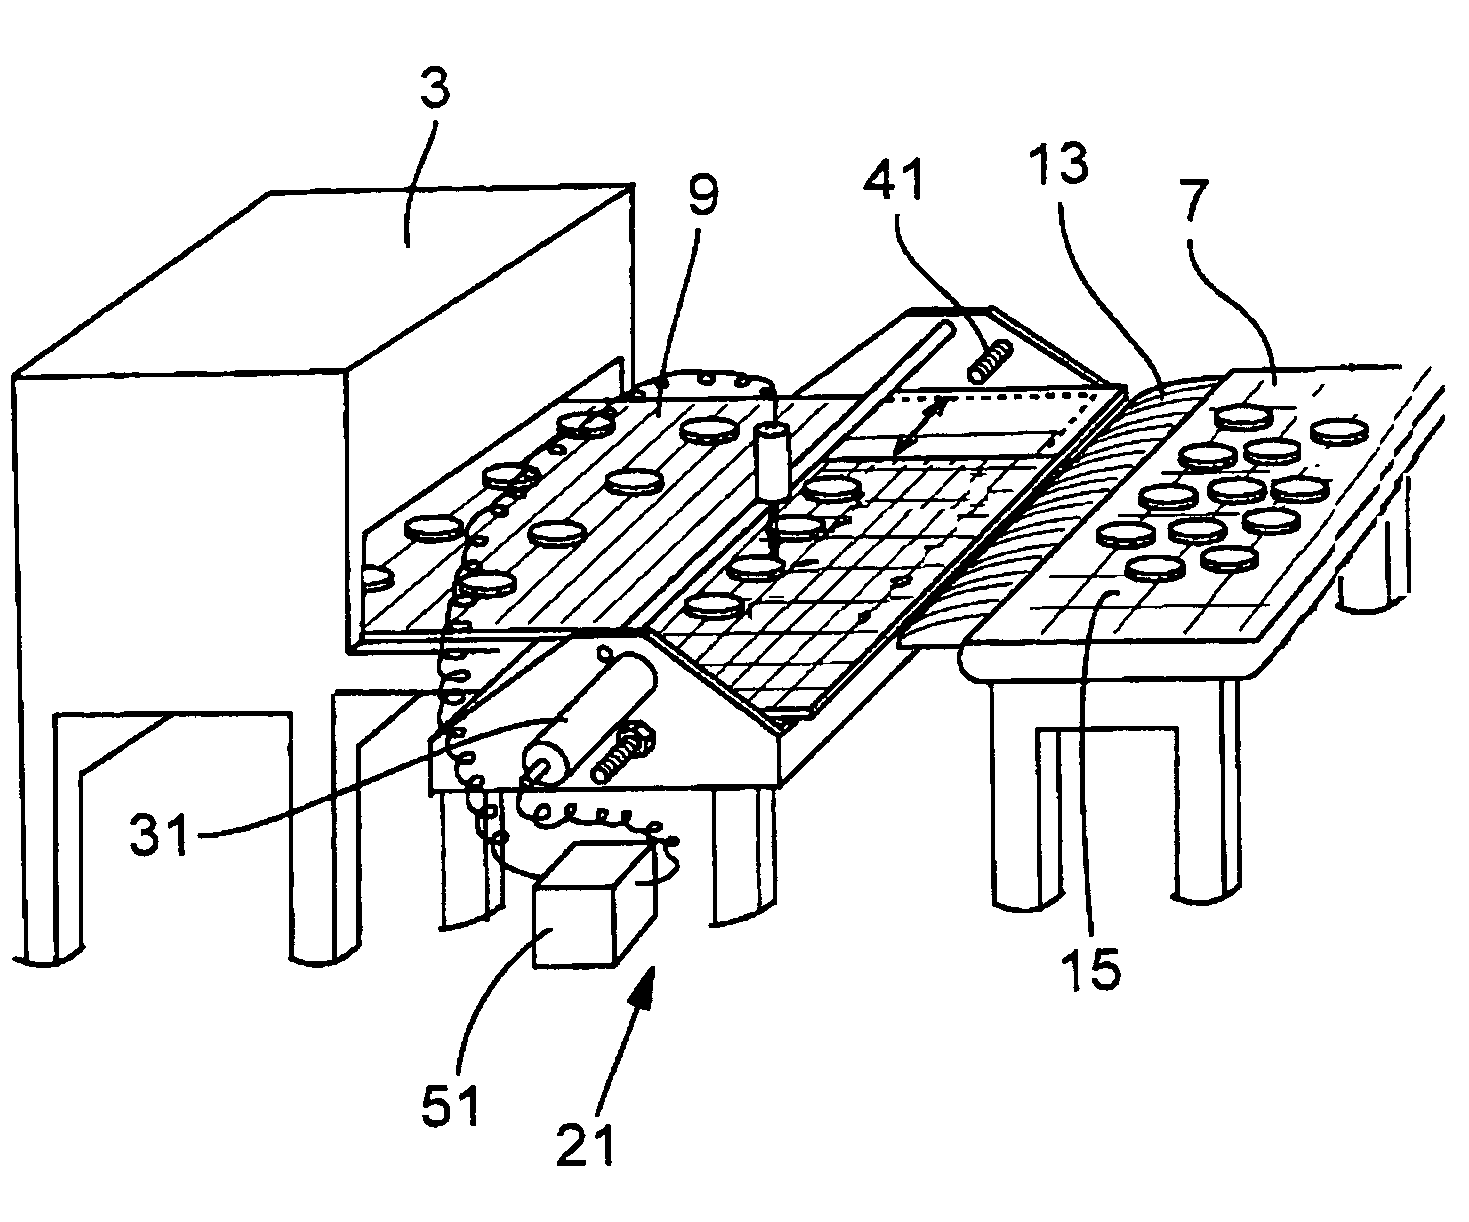 Systems and methods for compact arrangement of foodstuff in a conveyance system